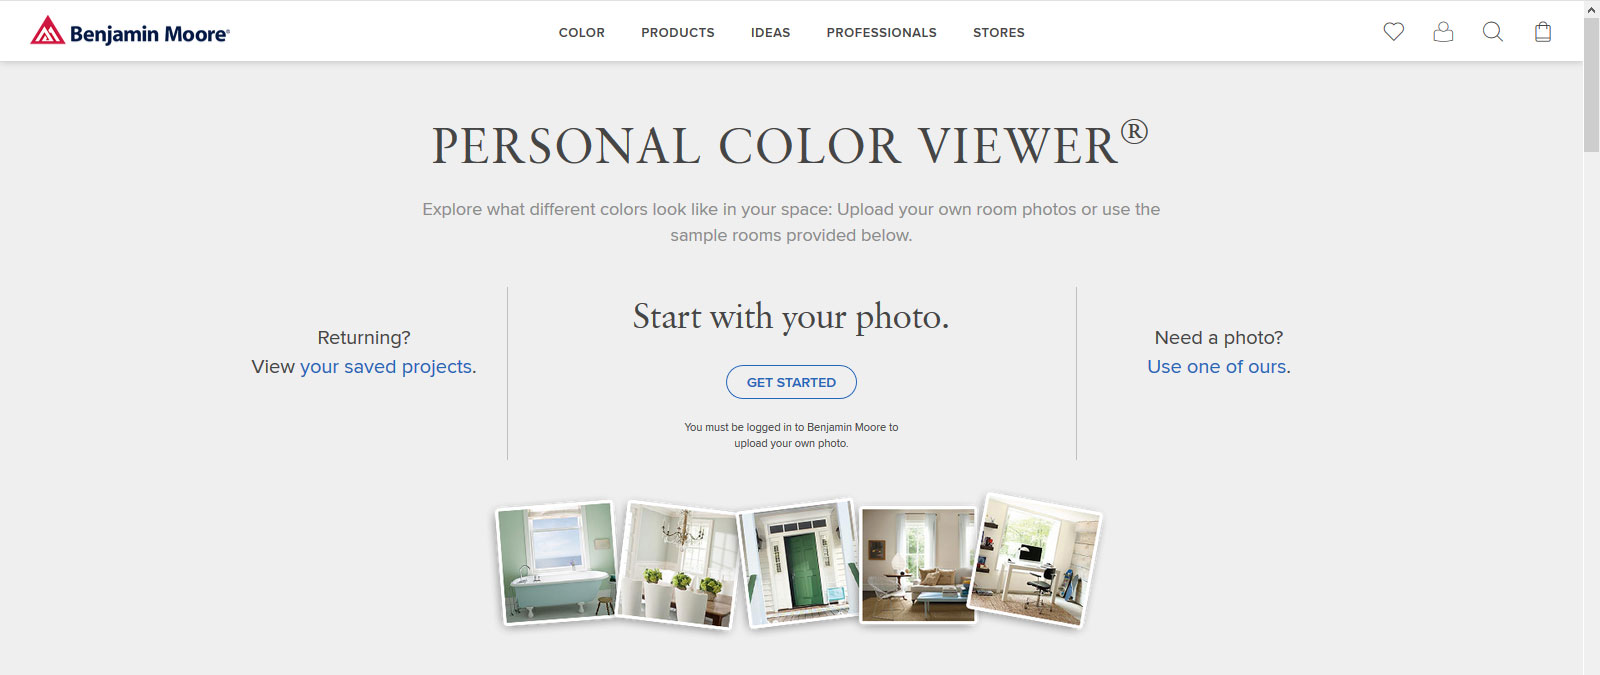 Personal Color Viewer 